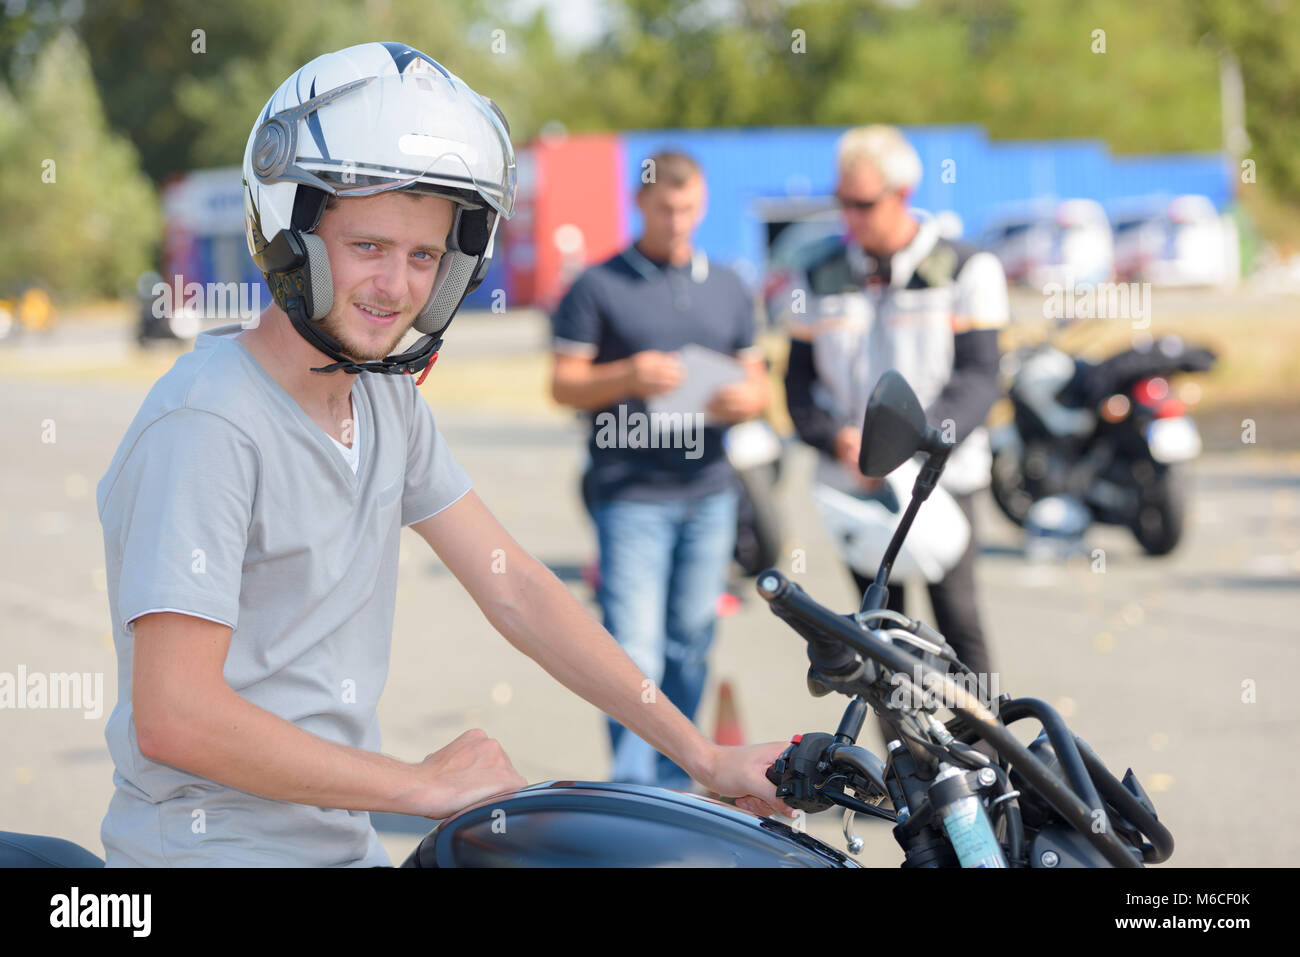 young man during motorcycle lesson Stock Photo